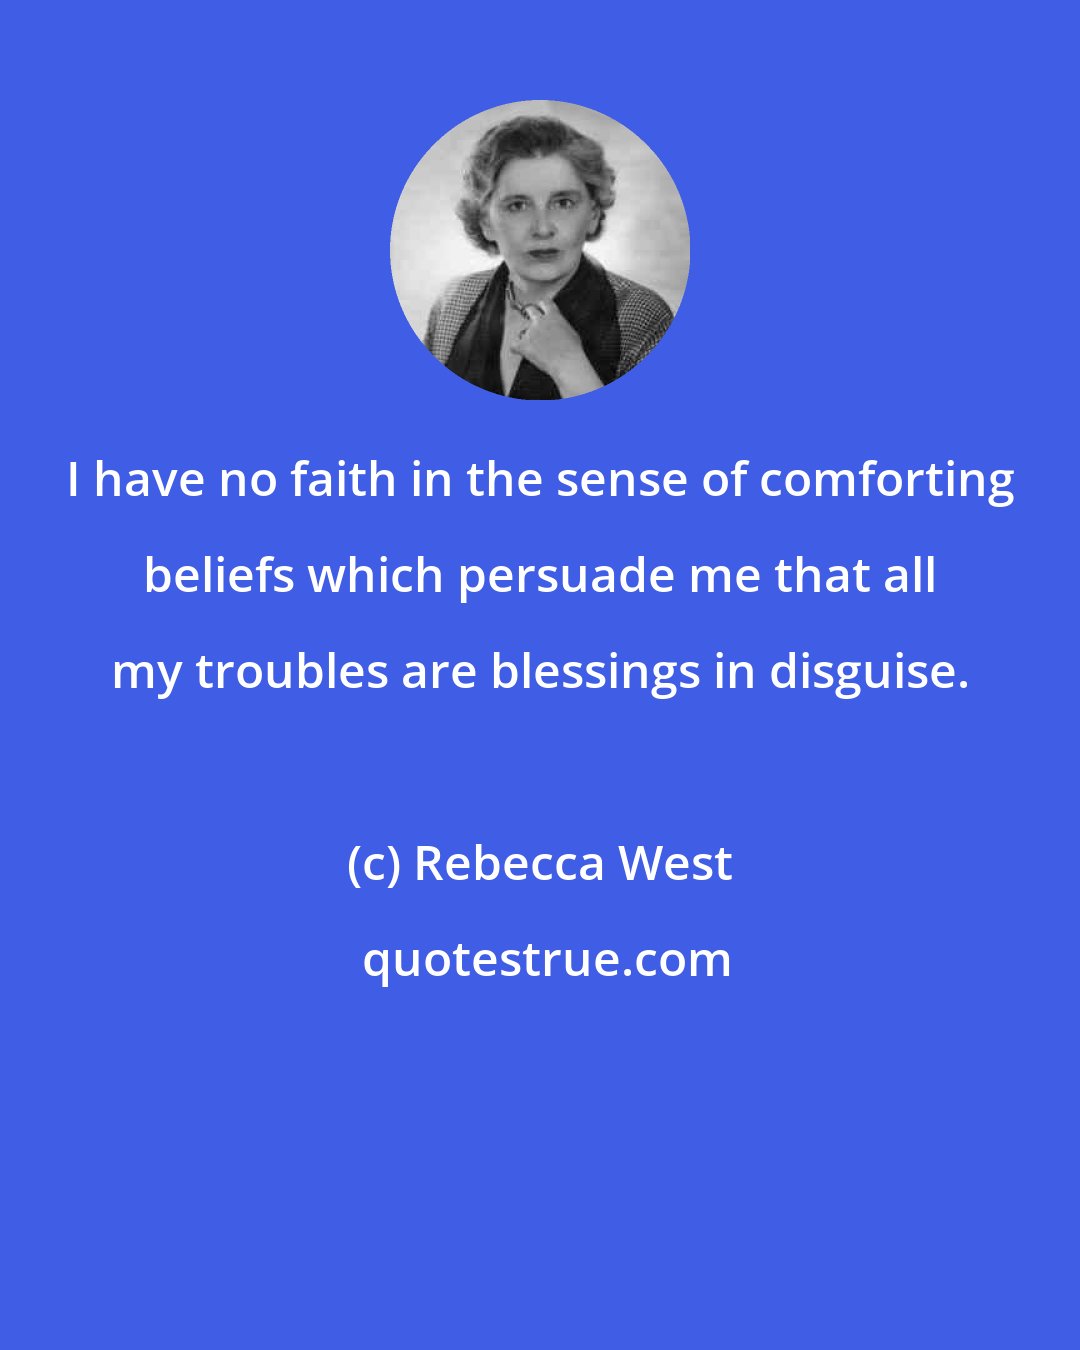 Rebecca West: I have no faith in the sense of comforting beliefs which persuade me that all my troubles are blessings in disguise.